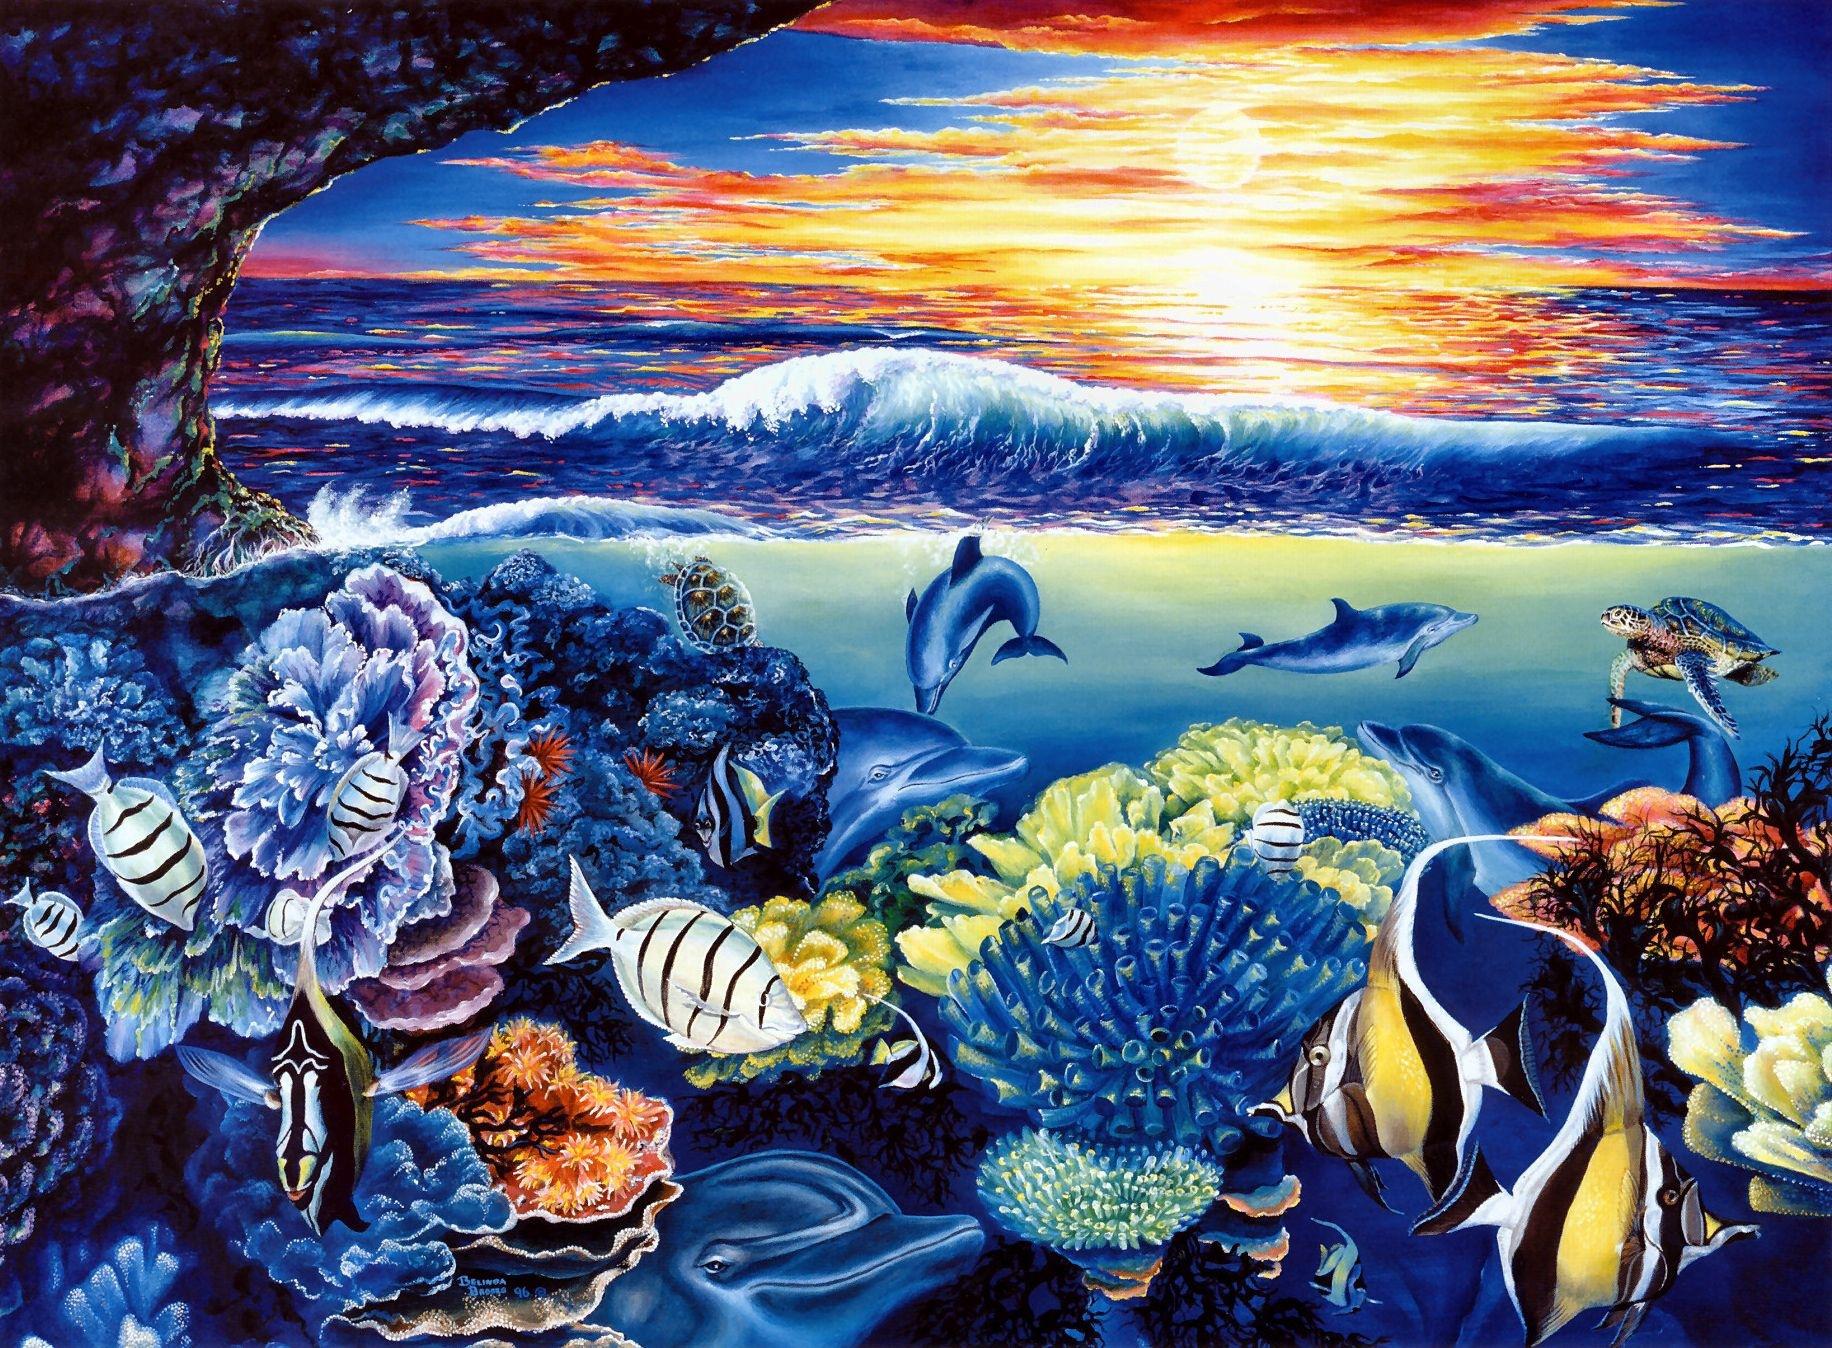 Marine life painting - High Quality and Resolution